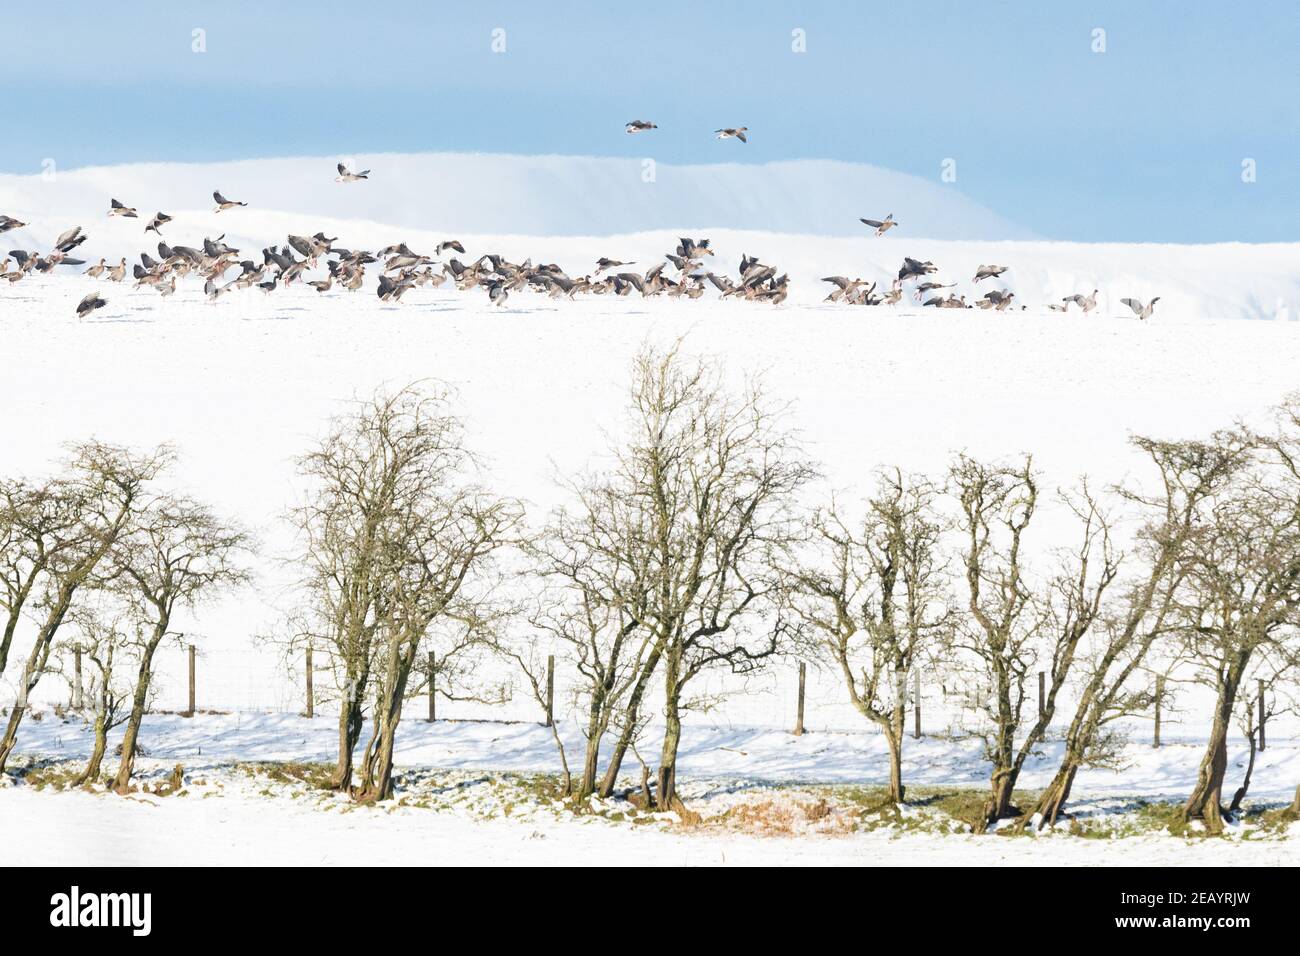 Killearn, Stirling, Scotland, UK. 11th Feb, 2021. UK weather - greylag geese landing on the brow of a snow covered field in Killearn Credit: Kay Roxby/Alamy Live News Stock Photo